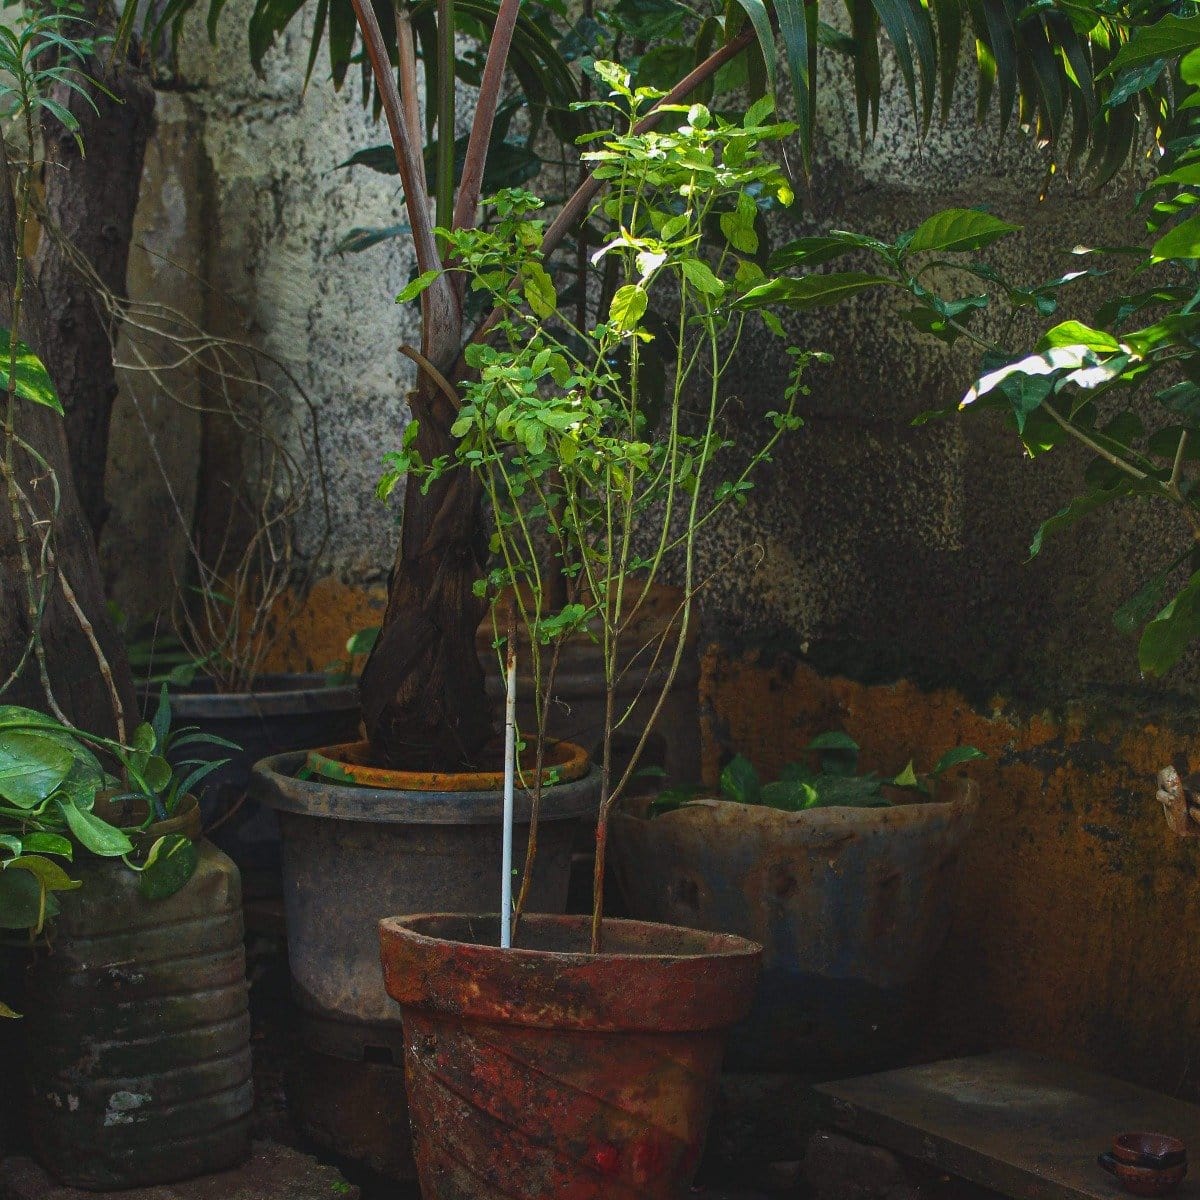 A small garden features a variety of potted plants with lush green foliage, perfect for enjoying a cup of Bliss: Sacred Tulsi Adaptogen Tea by Magic Hour. One tall plant in the center stands out among the others, which are placed in various containers against an aged concrete wall. The area appears shaded and serene.